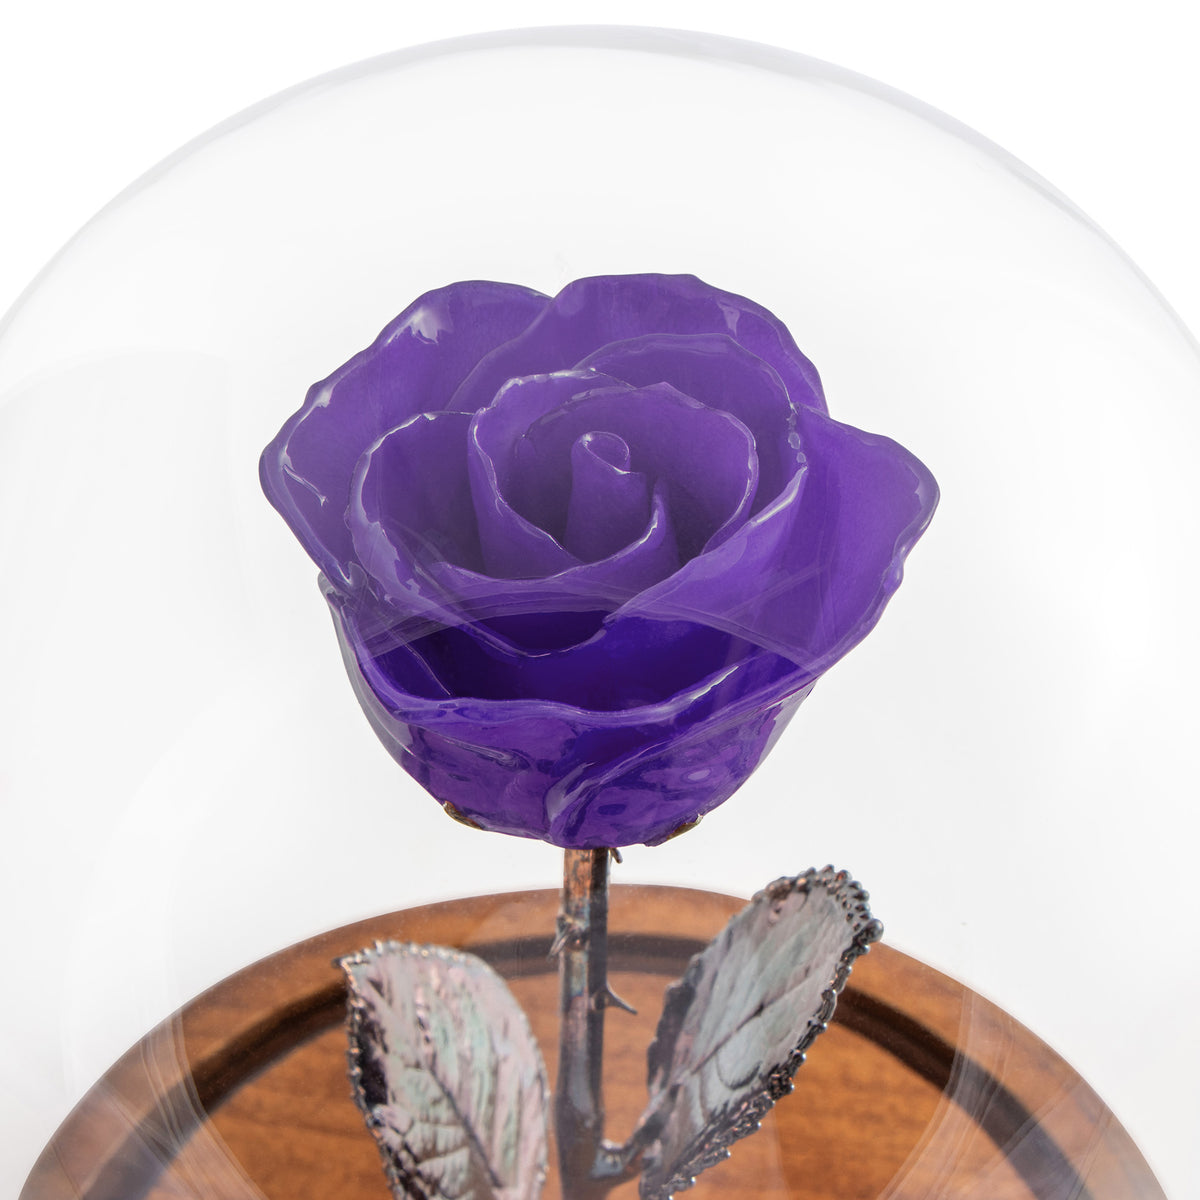 Purple Enchanted Rose (aka Beauty &amp; The Beast Rose) with Patina Copper Stem Mounted to A Hand Turned Solid Wood Base under a glass dome. Zoomed in view of flower.